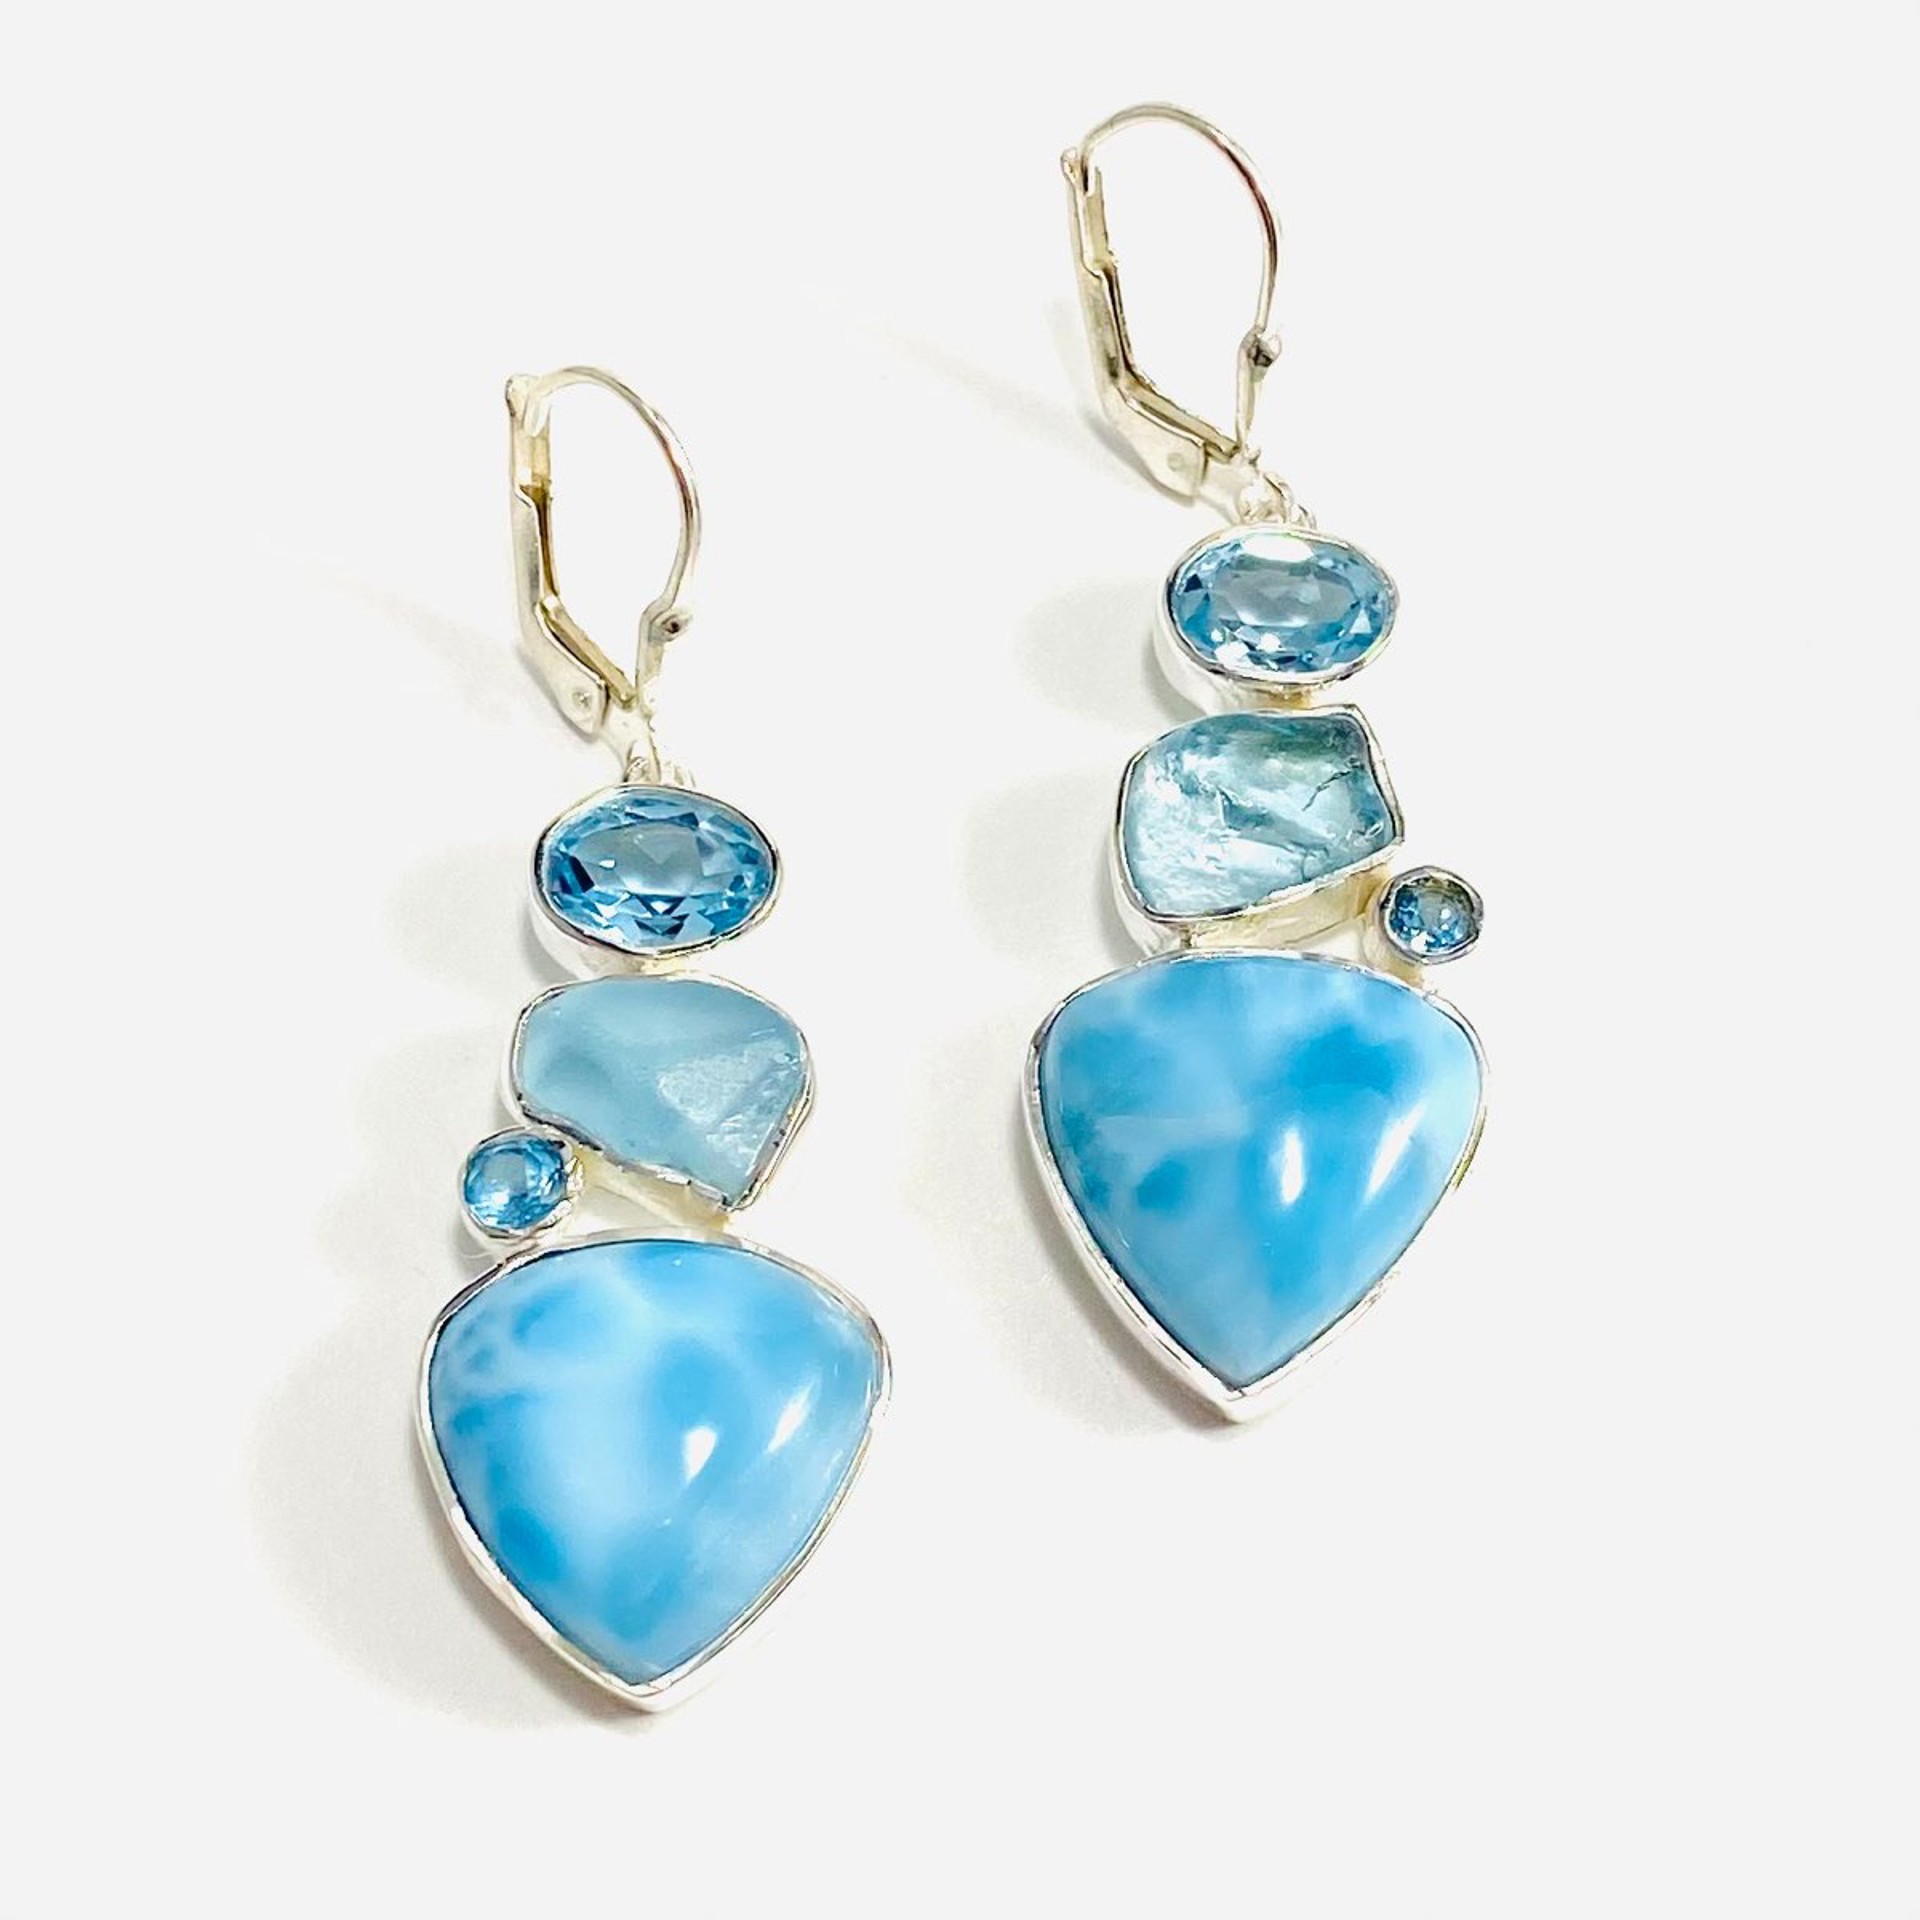 MON22-12 Larimar, Rough and Faceted Blue Topaz Earrings by Monica Mehta